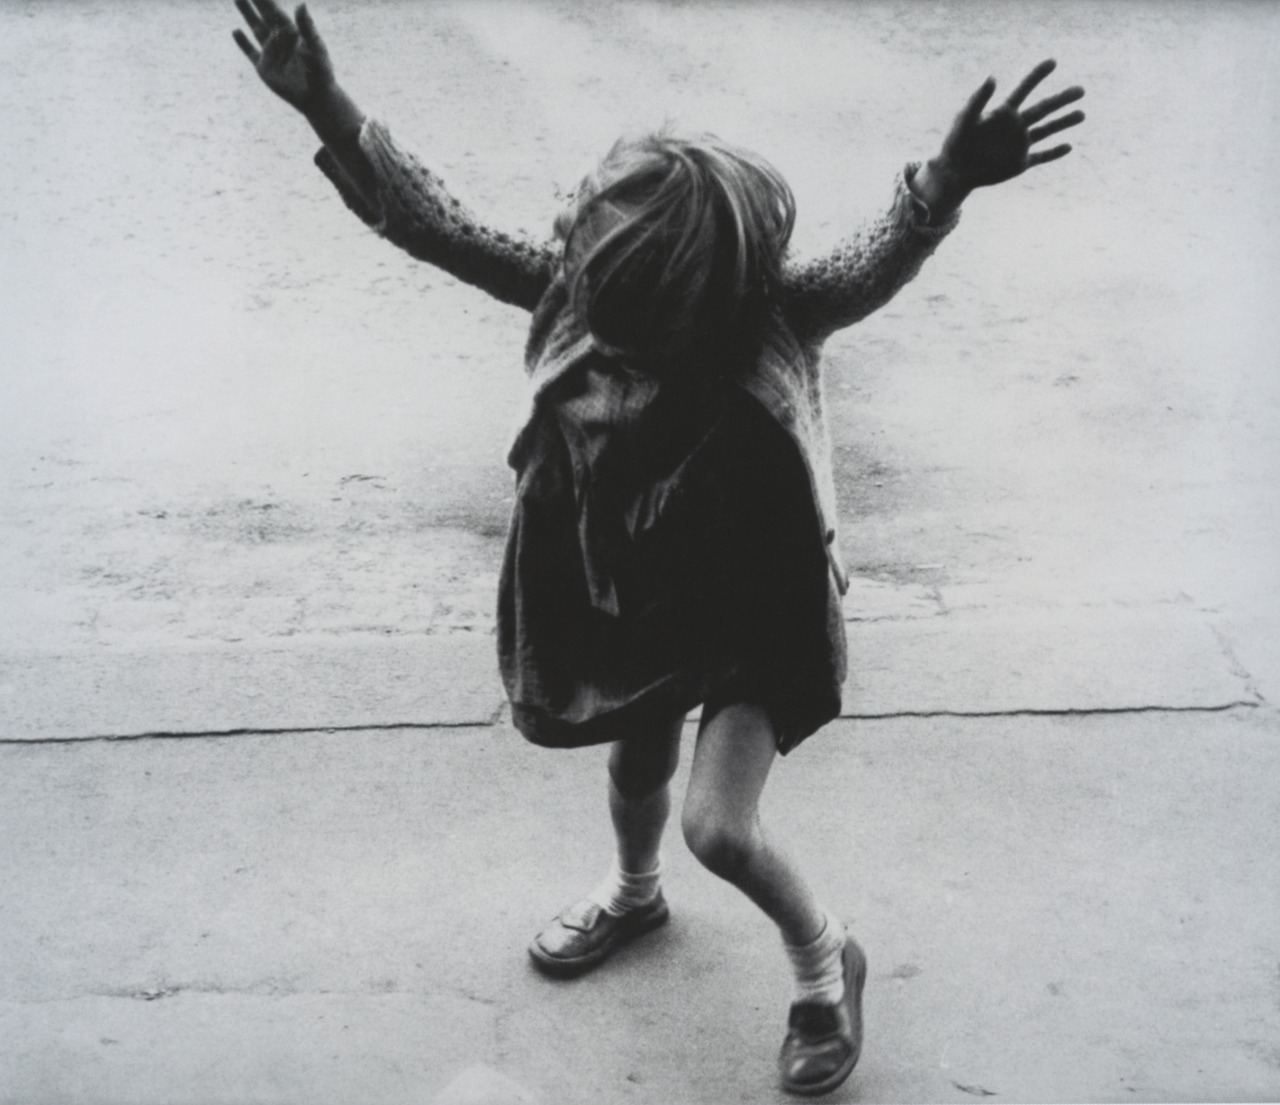 Roger Mayne : Girl About to do a Handstand, 1957